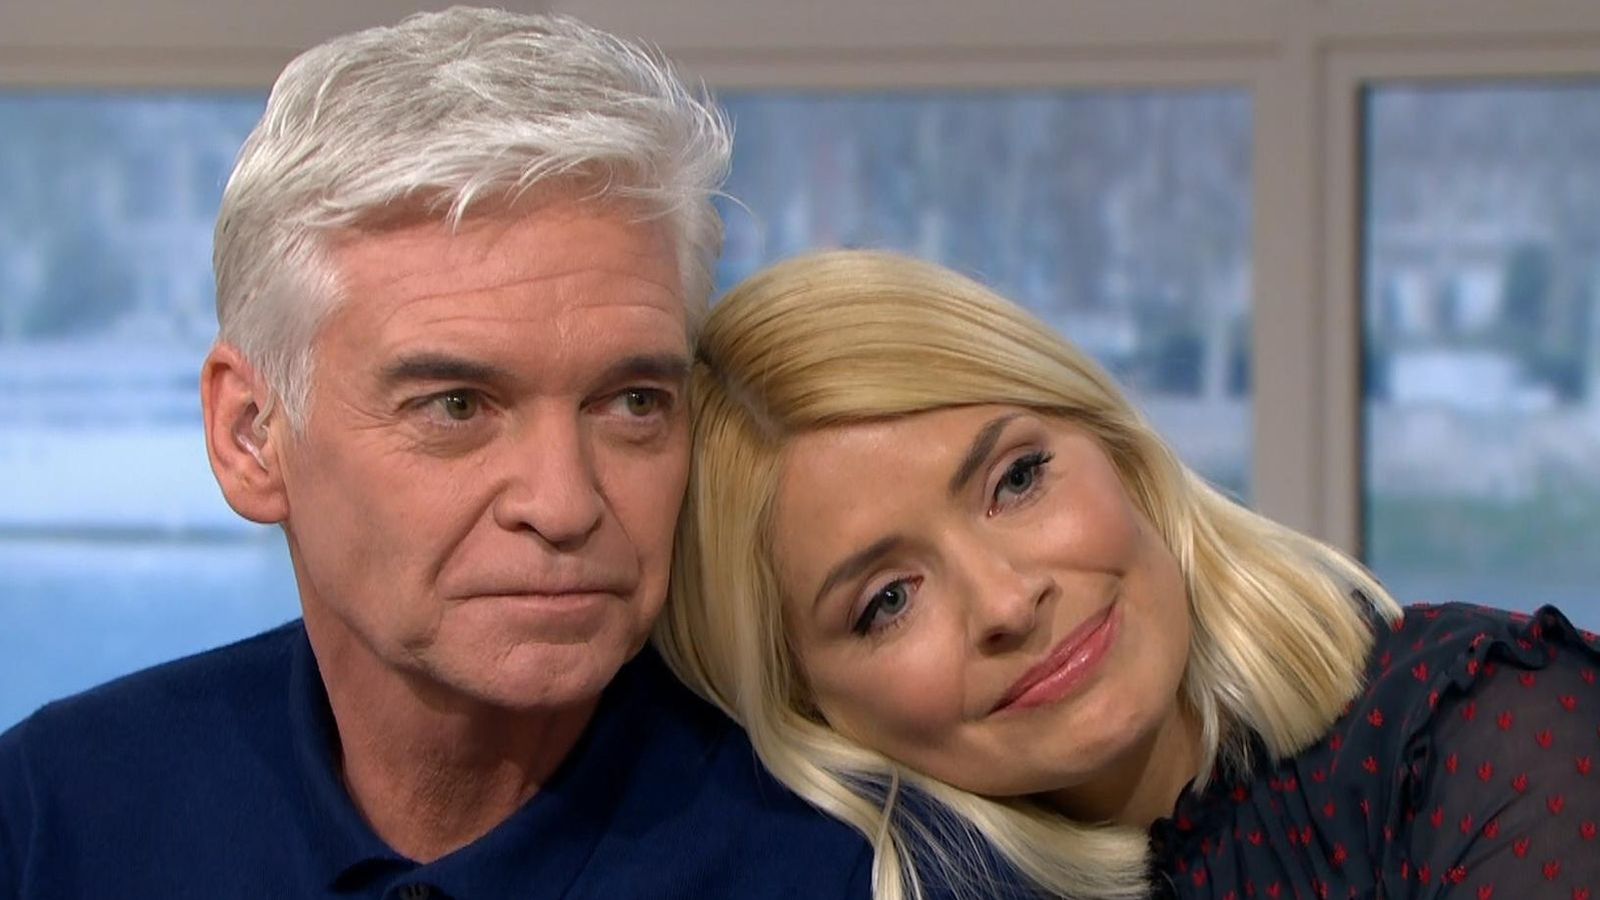 ITV responds to reports This Morning could be axed after Phillip Schofield controversy